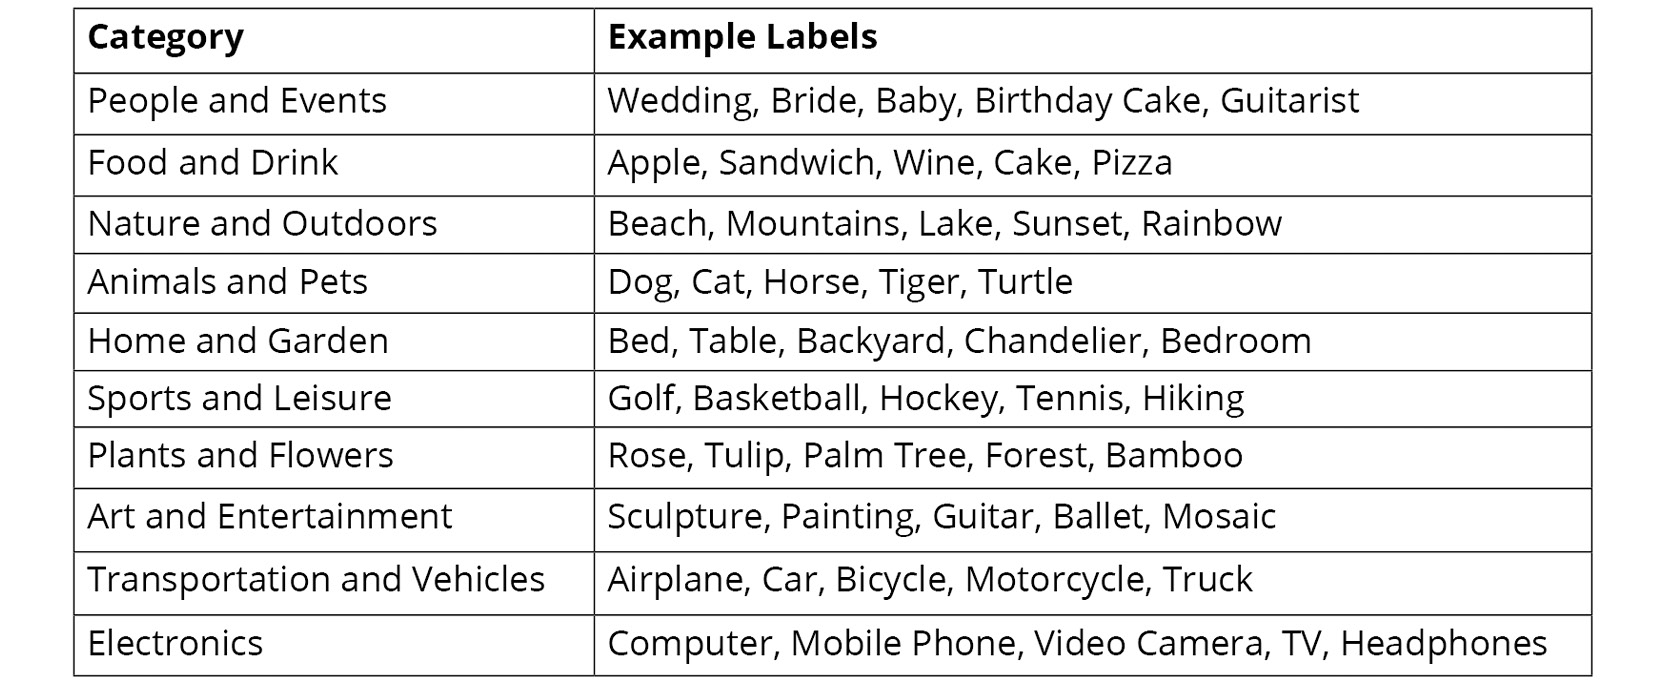 Figure 6.1: Labels supported by Amazon Rekognition
